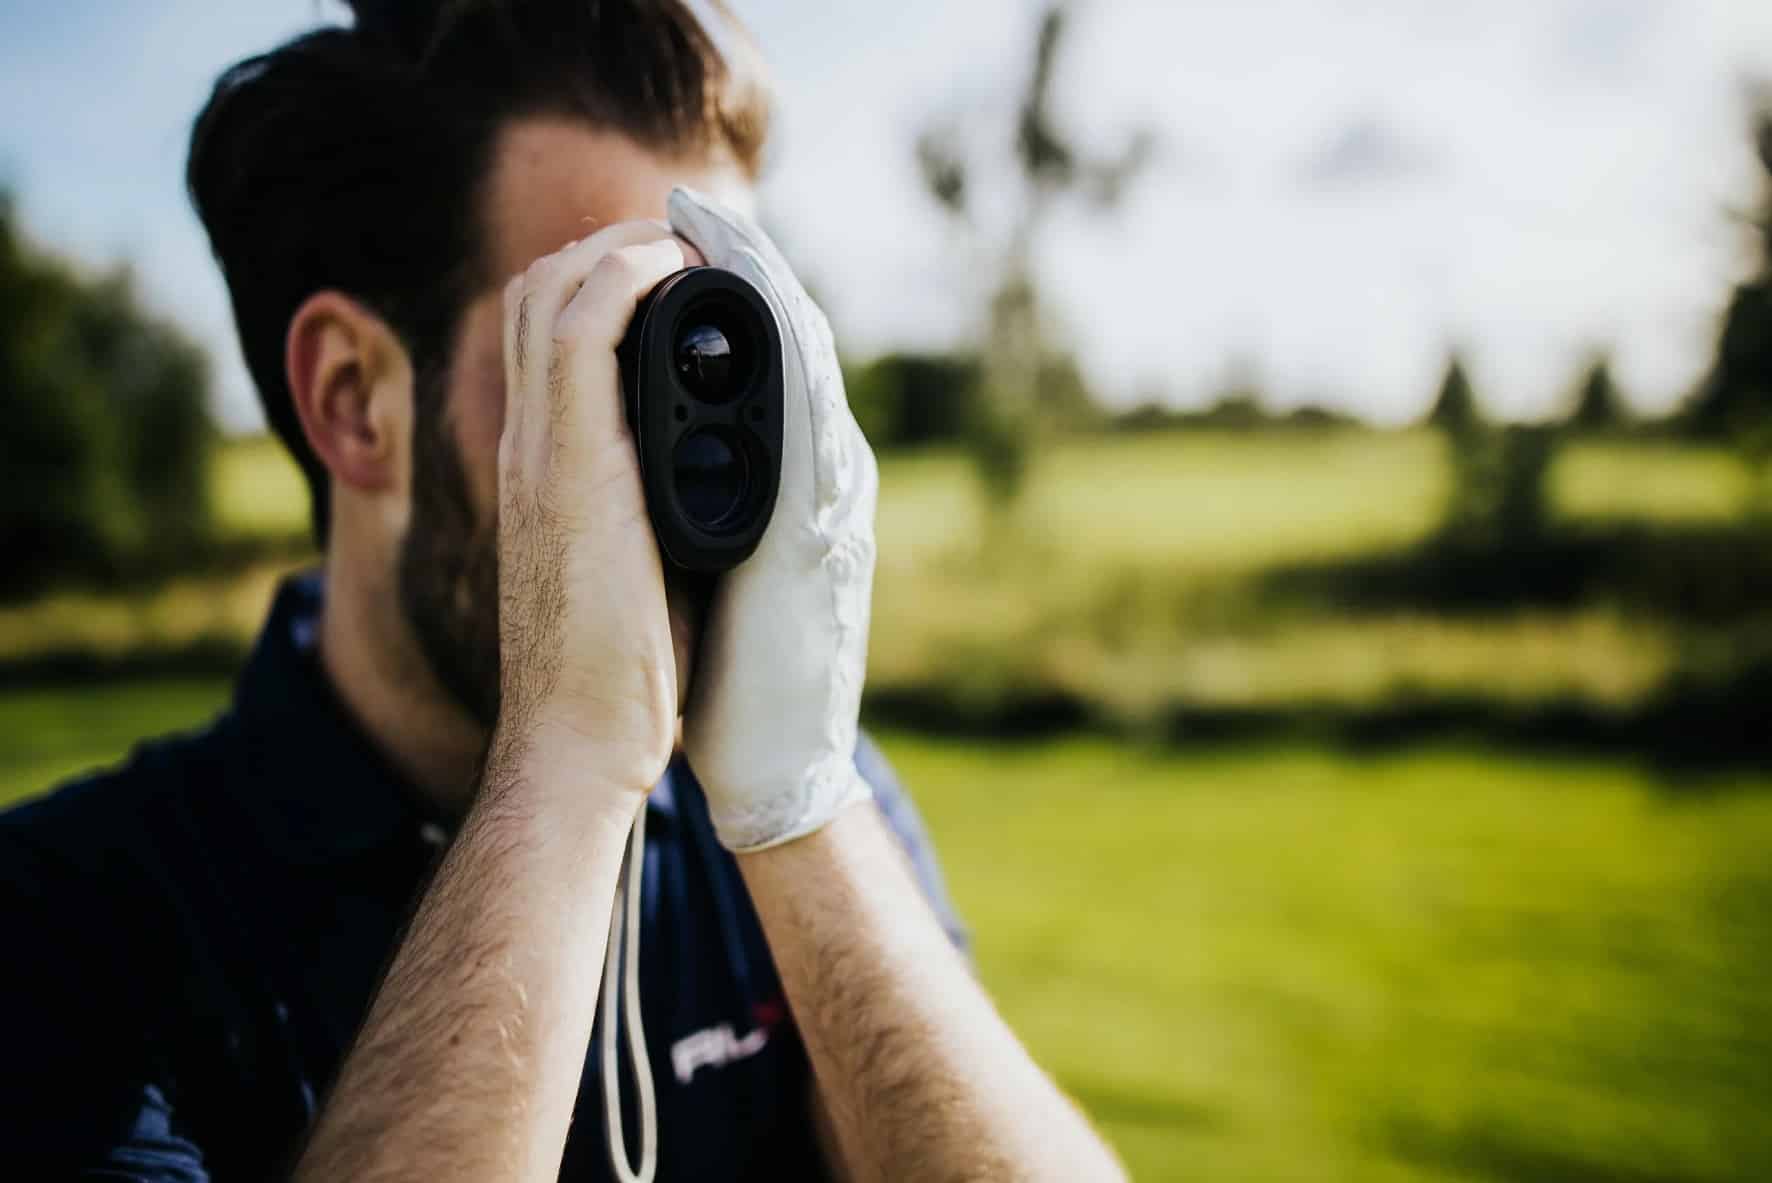 Top 5 Reasons to Use a Golf Rangefinder